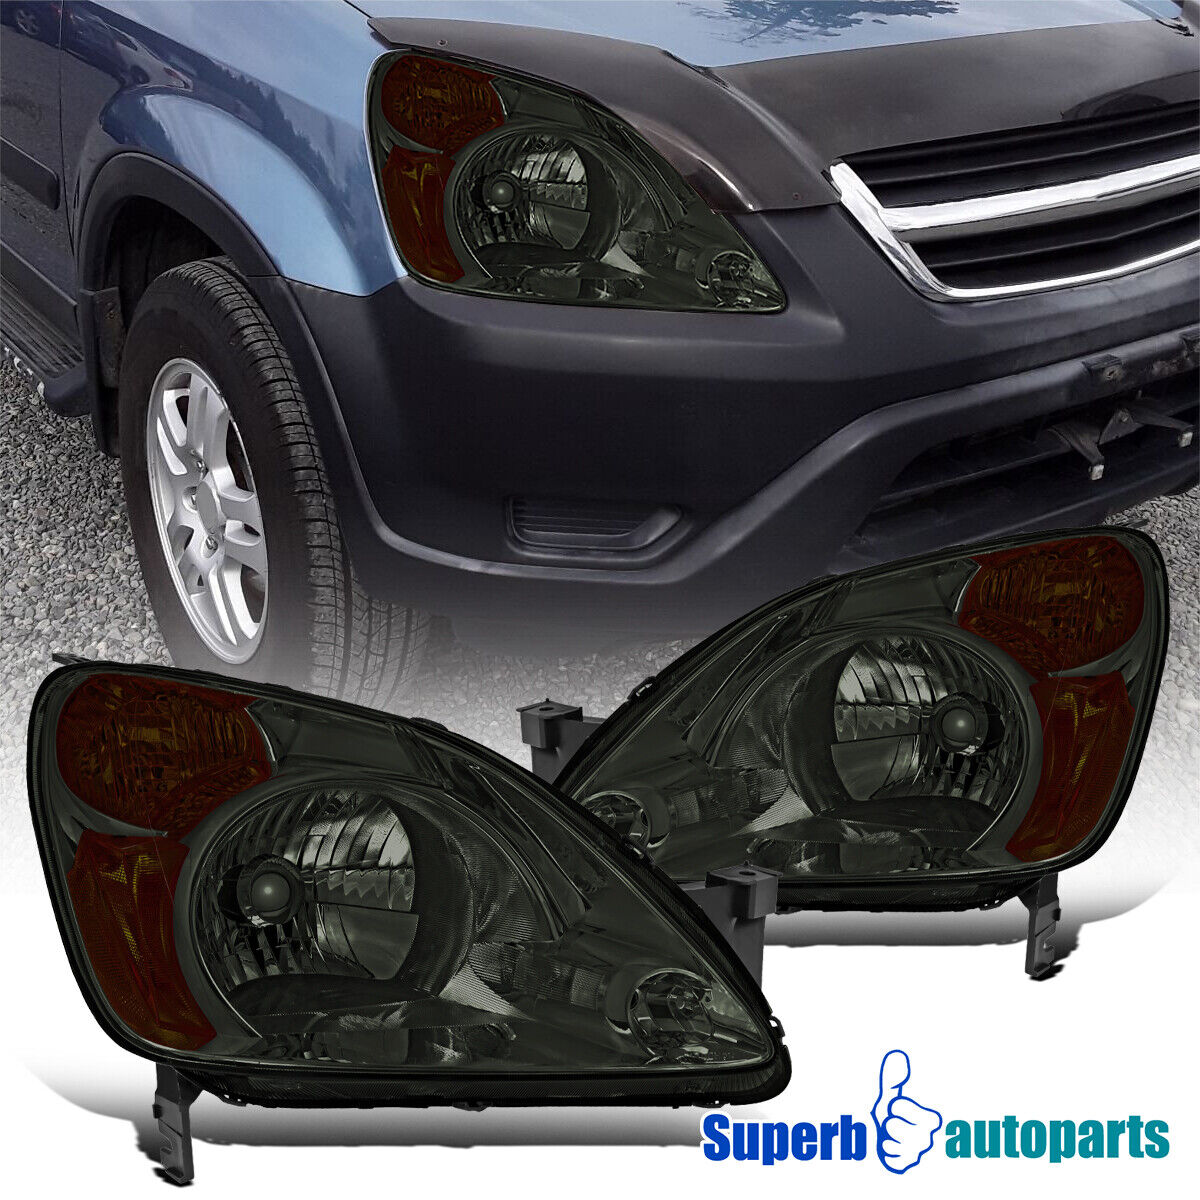 For 2002 2003 2004 Honda CR-V Smoke Headlights Lamps OE Replacement Assembly L+R